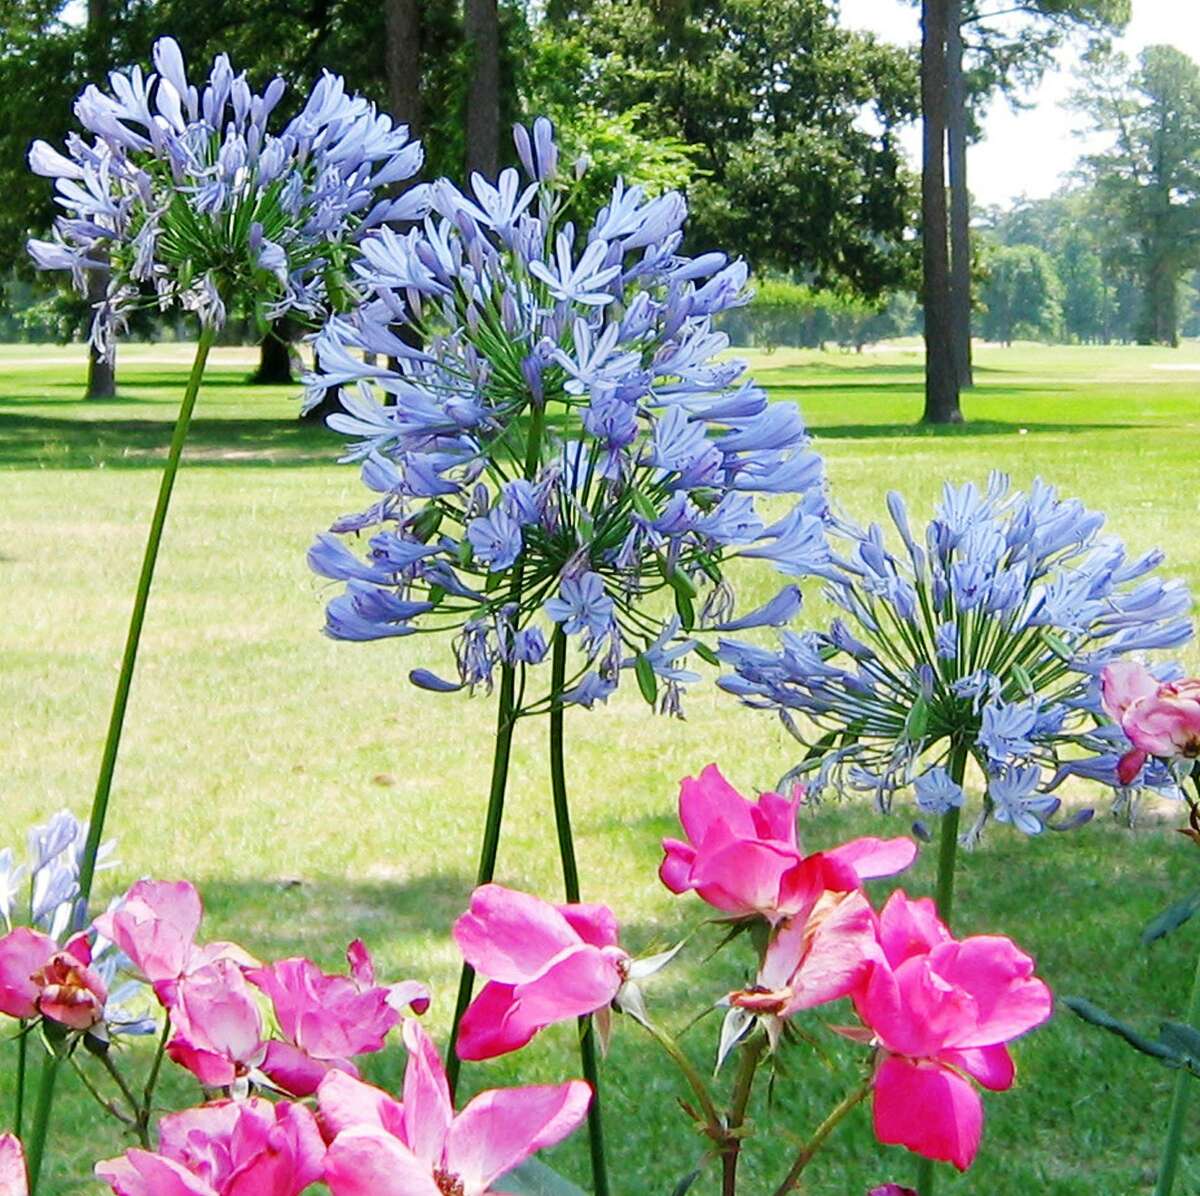 Agapanthus, or lily-of-the-Nile, needs excellent drainage. It won’t bloom if overwatered.